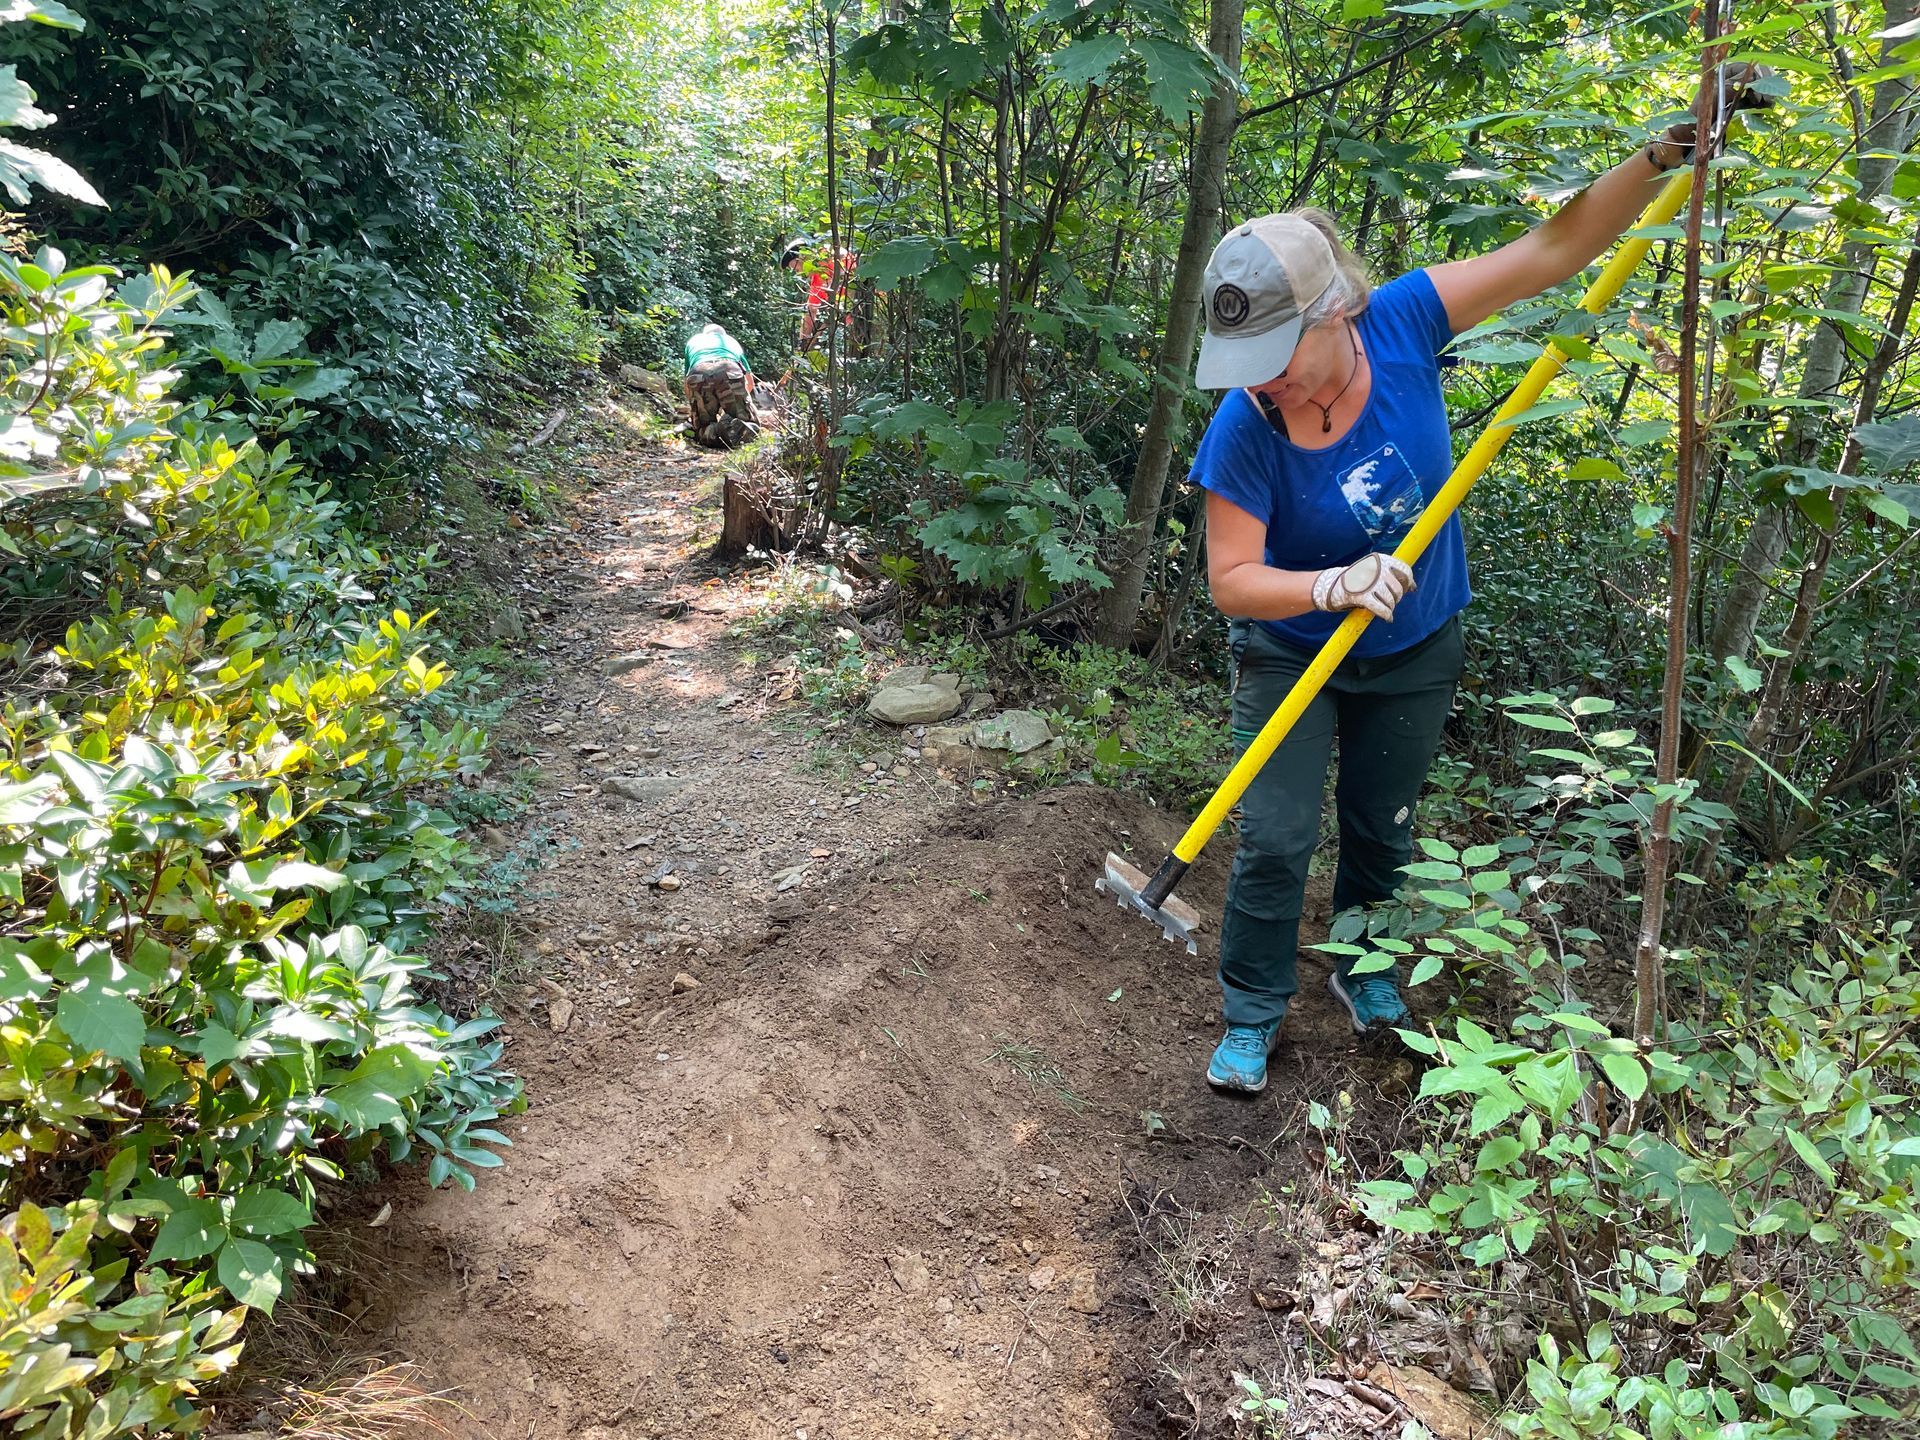 PATC volunteers use tools to perform trail maintenance, in the forest.